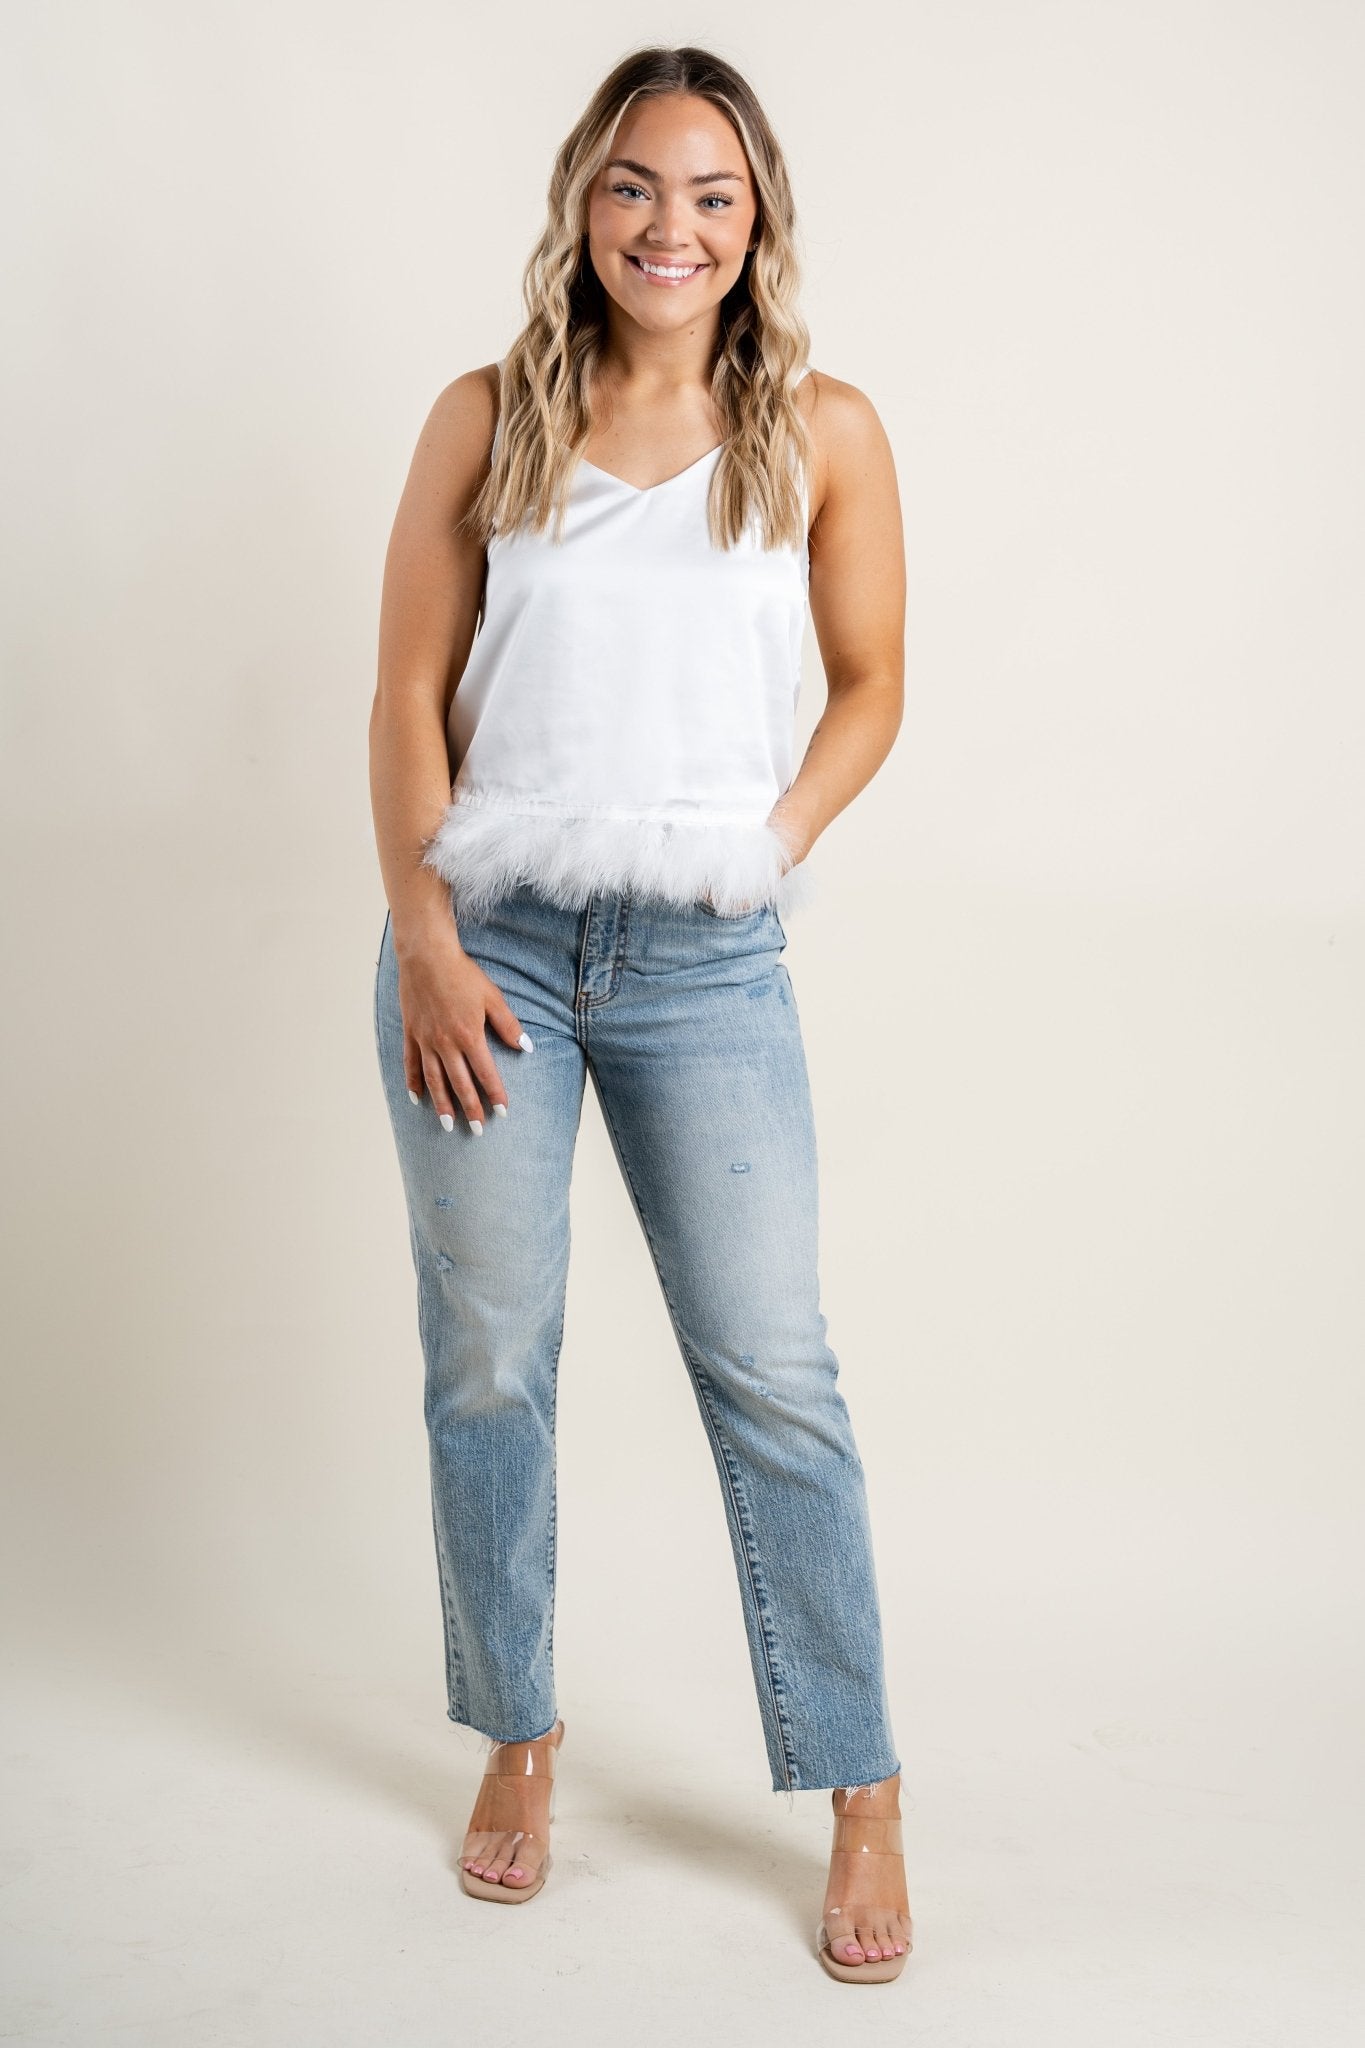 Feather trim cami tank top ivory - Cute Tank Top - Trendy Bride and Bridesmaid Fashion at Lush Fashion Lounge Boutique in Oklahoma